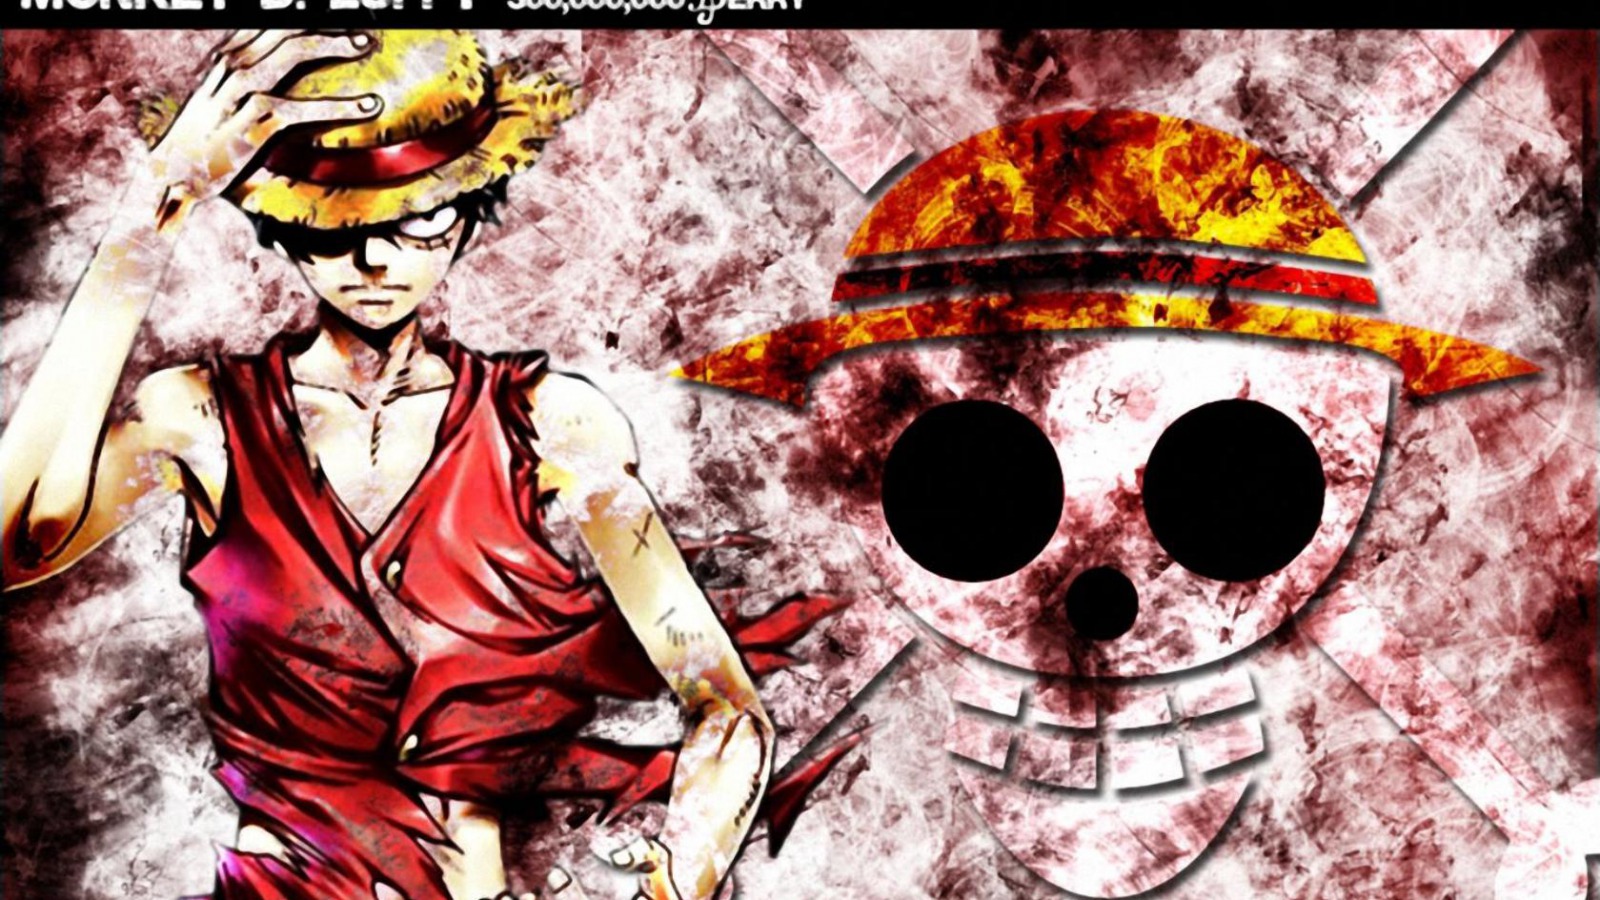 30 Cool One Piece Wallpapers HD   MixHD wallpapers 1600x900